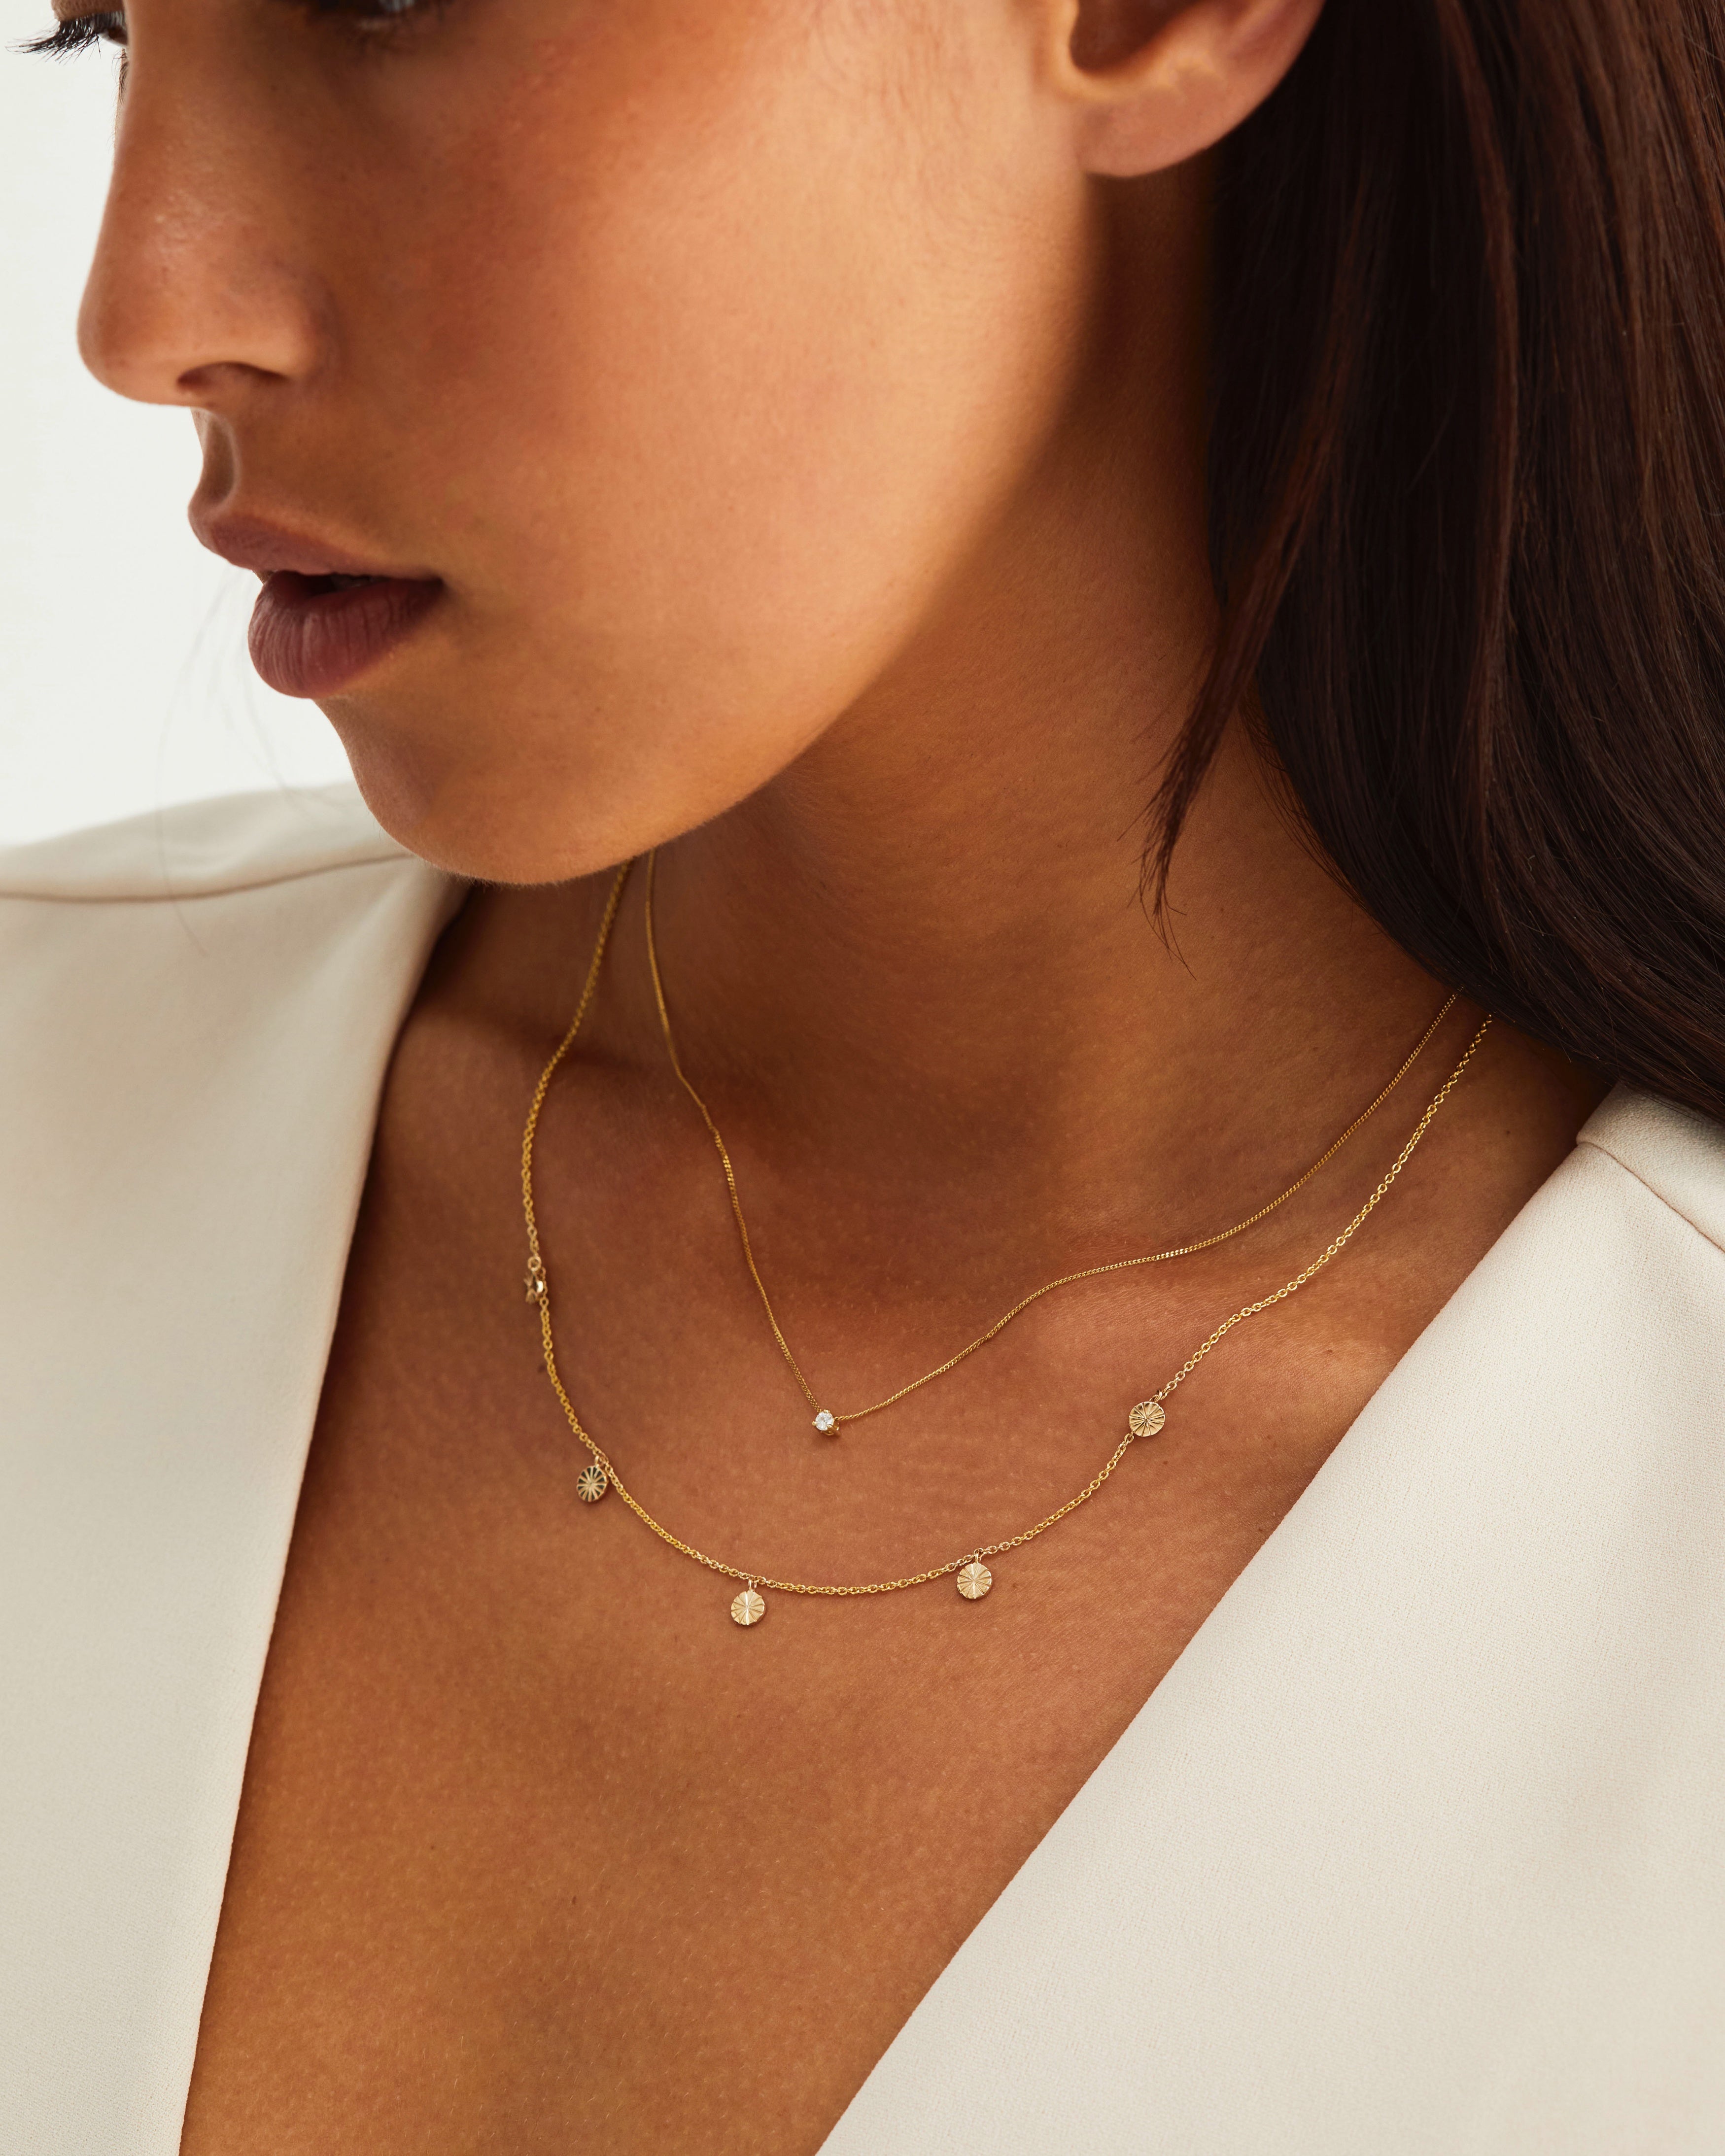 A woman wearing the Jia Charm Necklace in yellow gold.